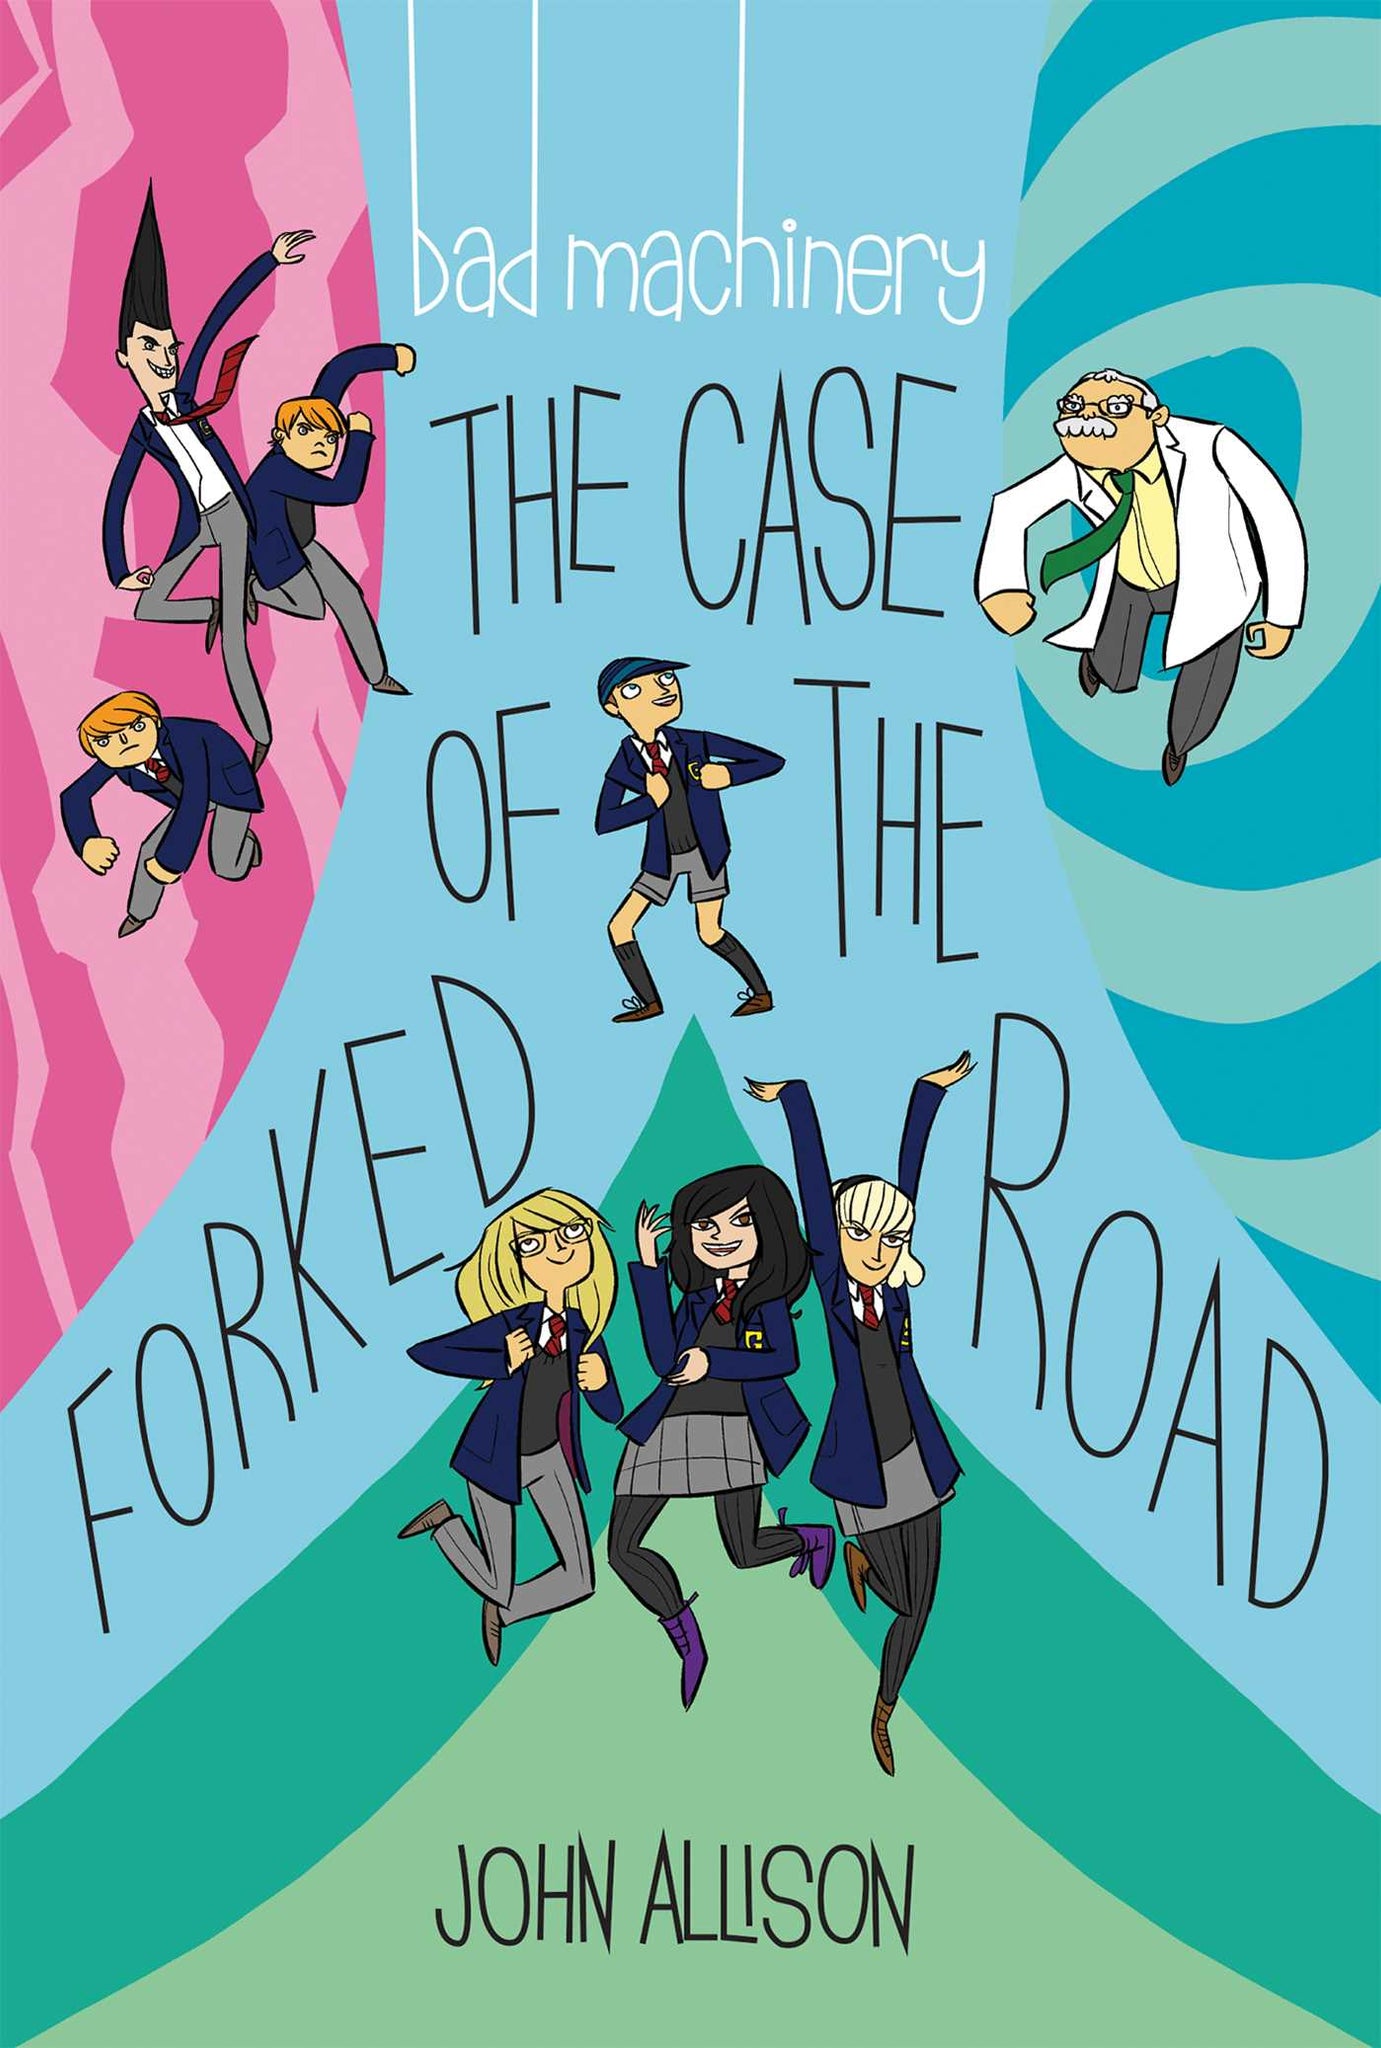 Bad Machinery Vol. 7 : The Case of the Forked Road